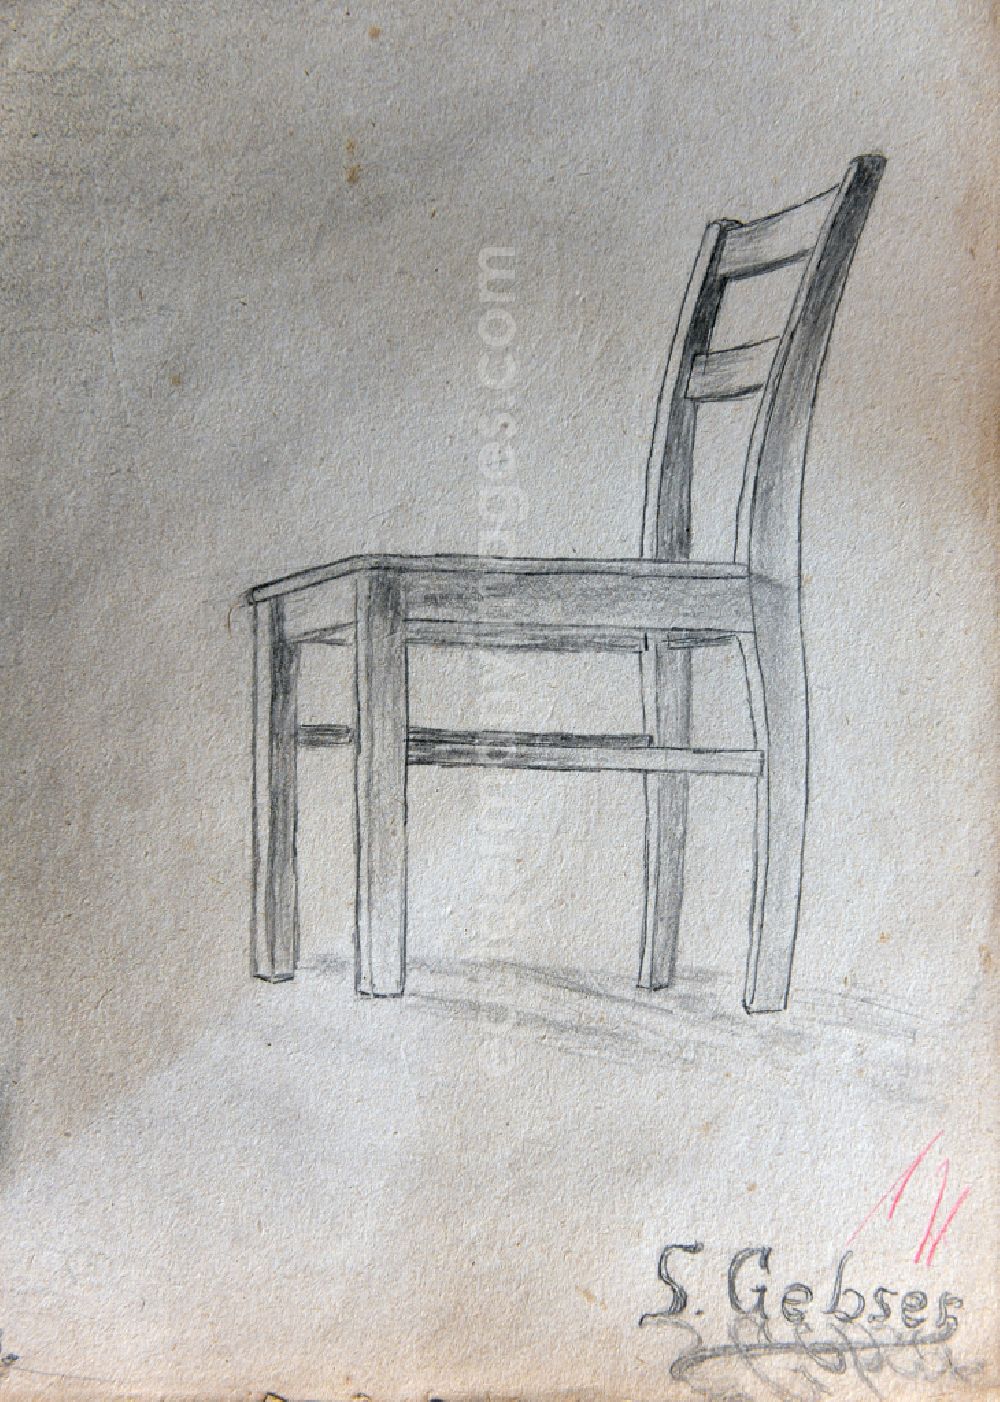 GDR photo archive: Halberstadt - VG picture free work: pencil drawing chair by the artist Siegfried Gebser in Halberstadt in the state Saxony-Anhalt on the territory of the former GDR, German Democratic Republic